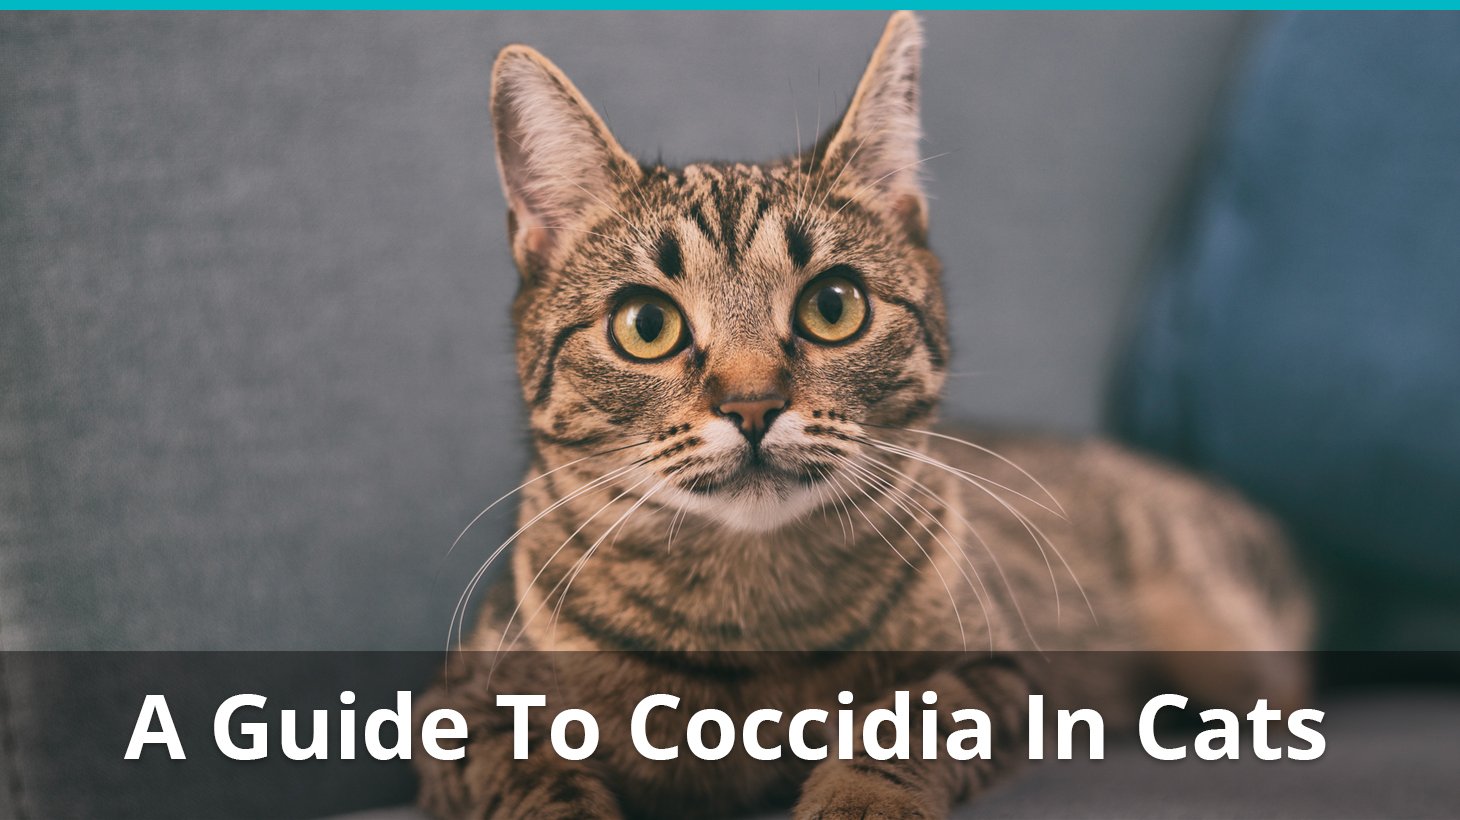 Coccidia In Cats And Kittens: What Is It, Symptoms, Treatments, And More1460 x 820